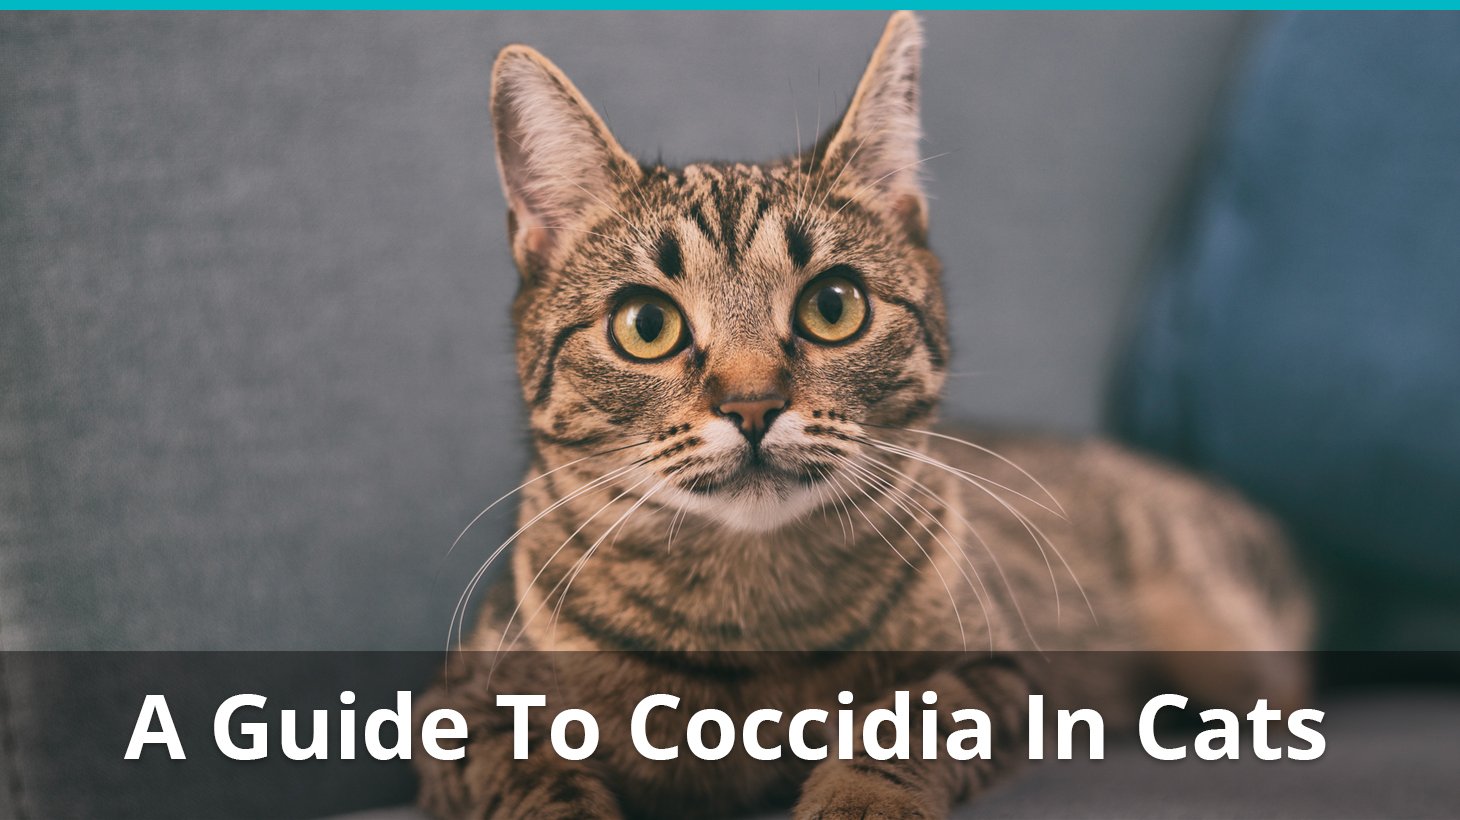 Coccidia In Cats And Kittens: What Is It, Symptoms, Treatments, And More1460 x 820